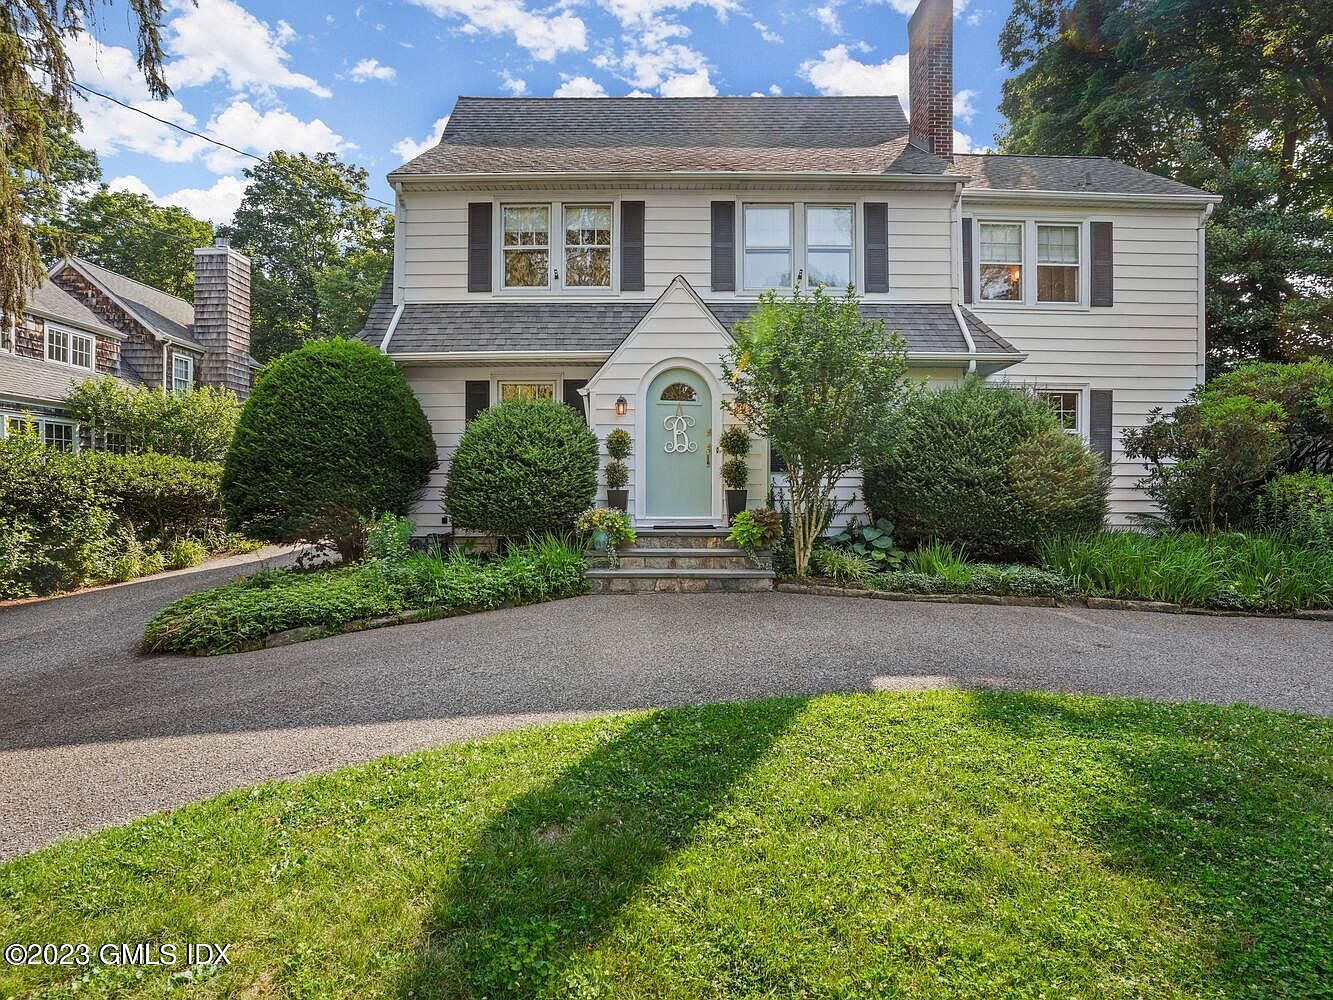 Image of 9 Oval Avenue Riverside CT exterior